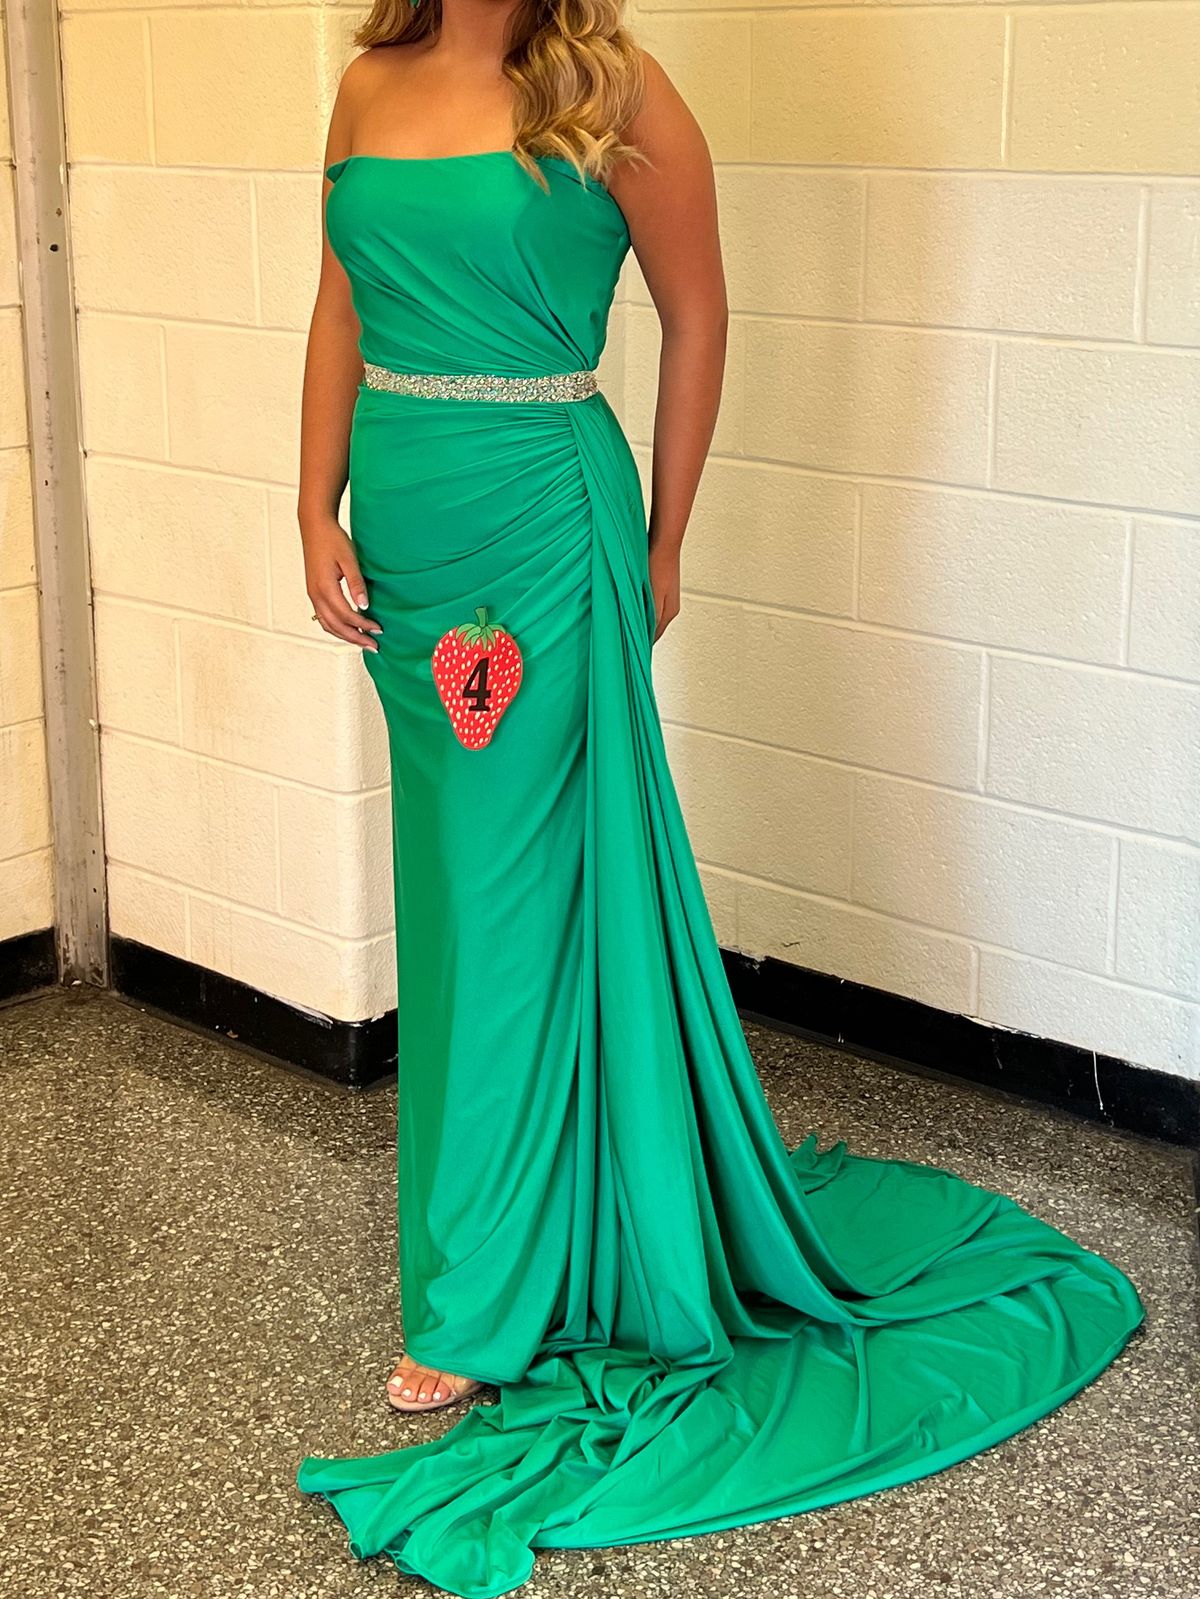 Style 54928 Sherri Hill Size 6 Prom Strapless Green Floor Length Maxi on Queenly